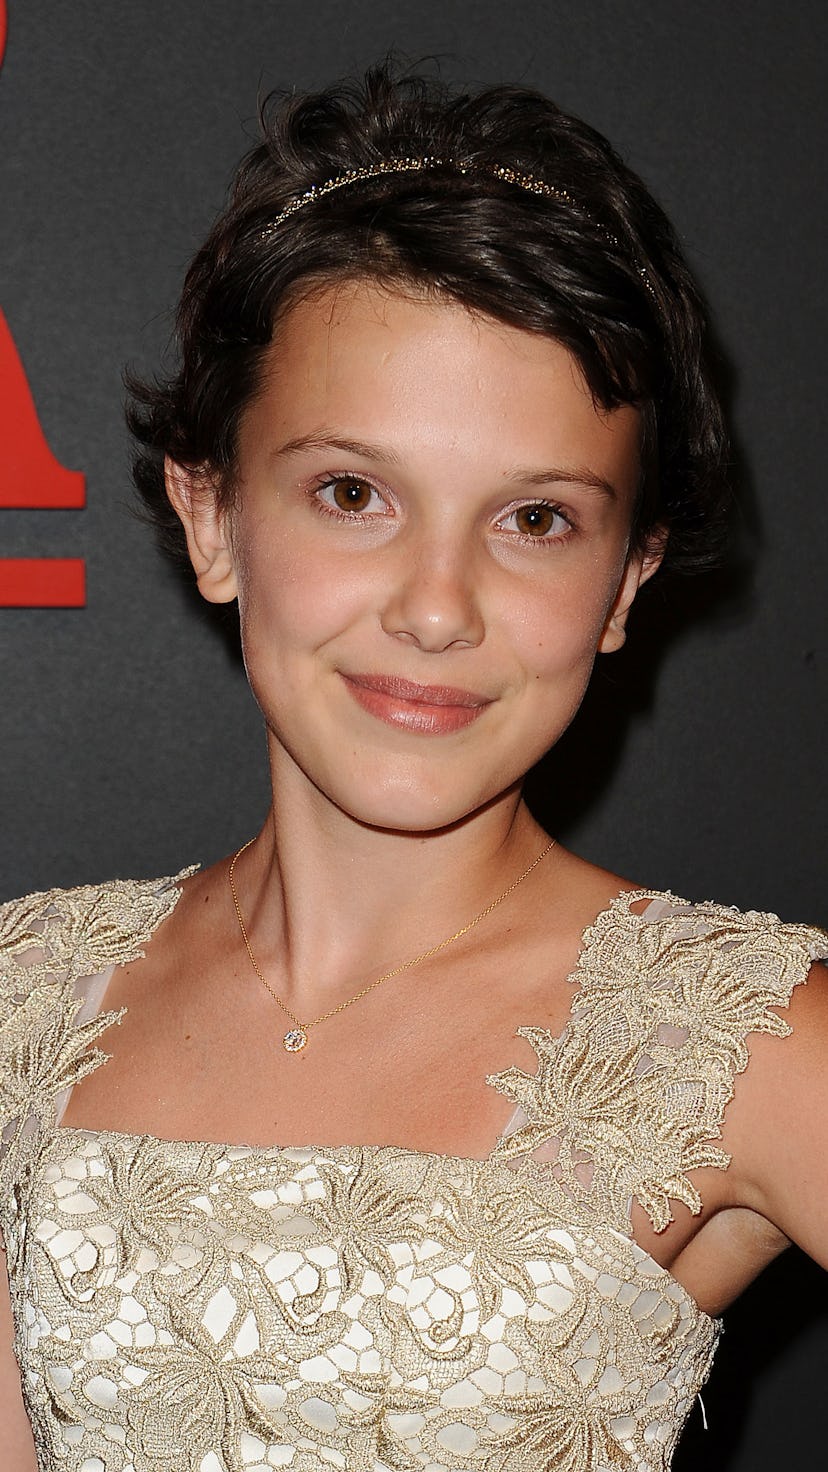 Millie Bobby Brown who plays Eleven/Jane in 'Stranger Things' at the Season 1 premiere in 2016.